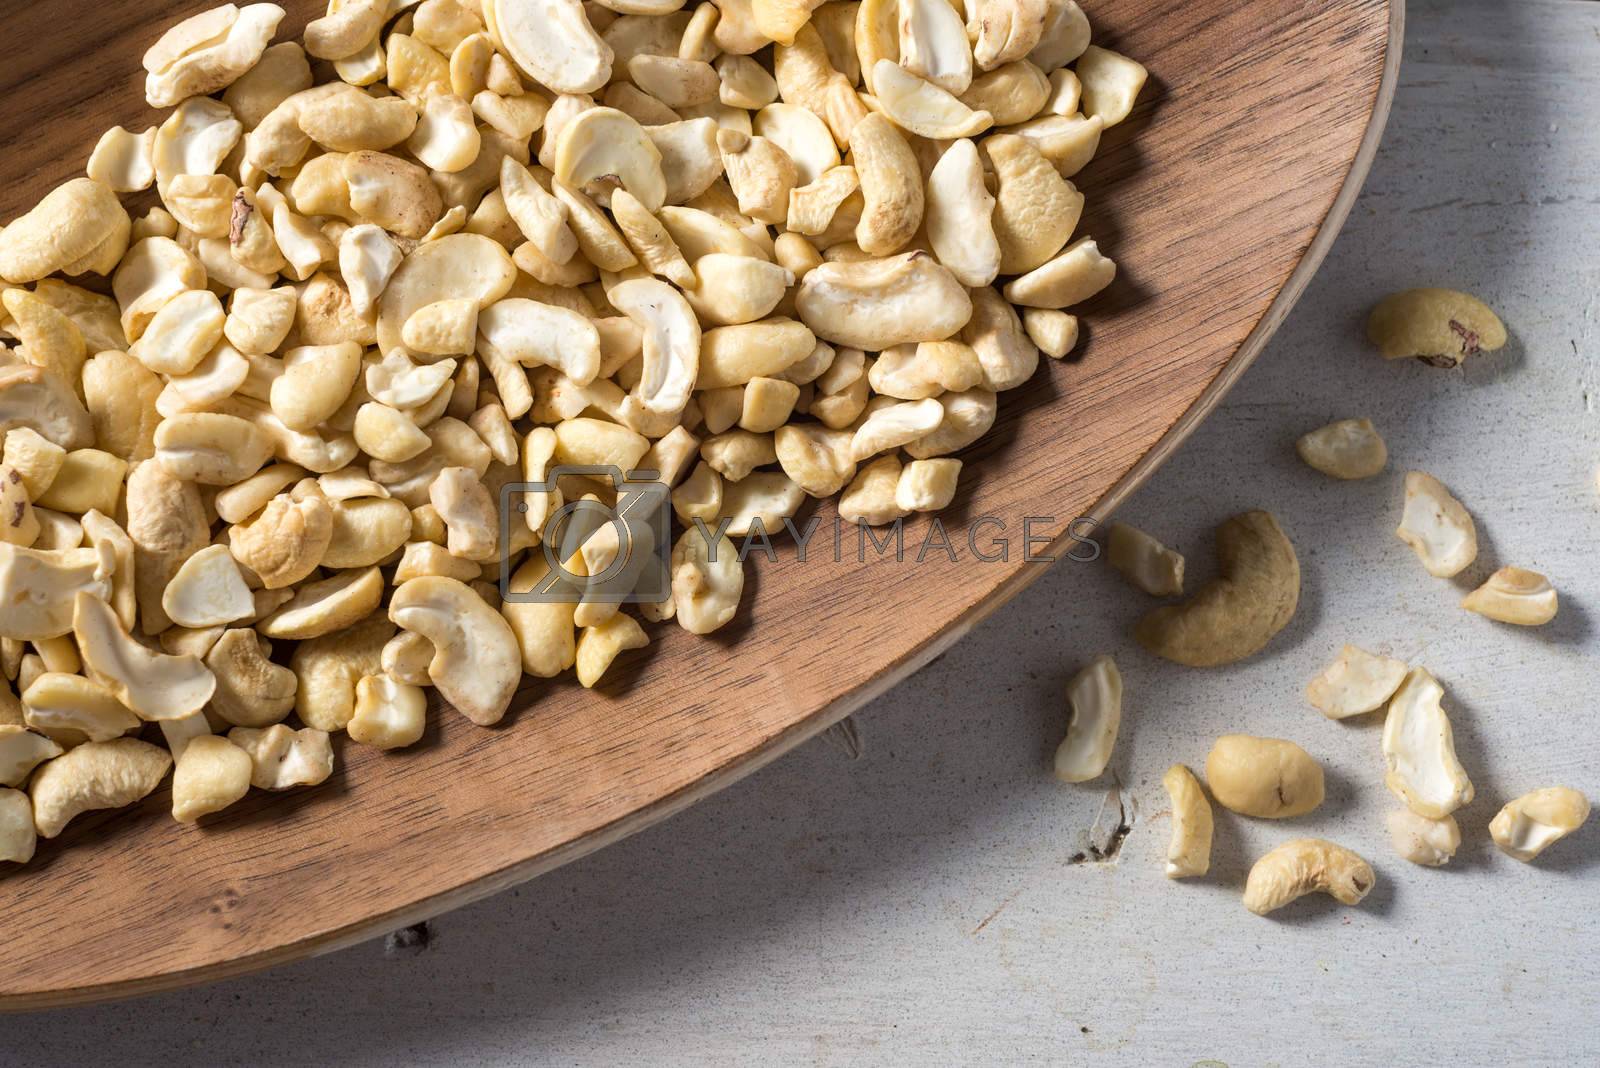 Royalty free image of Bowl of cashew pieces healthy protein snack  by Boyrcr420